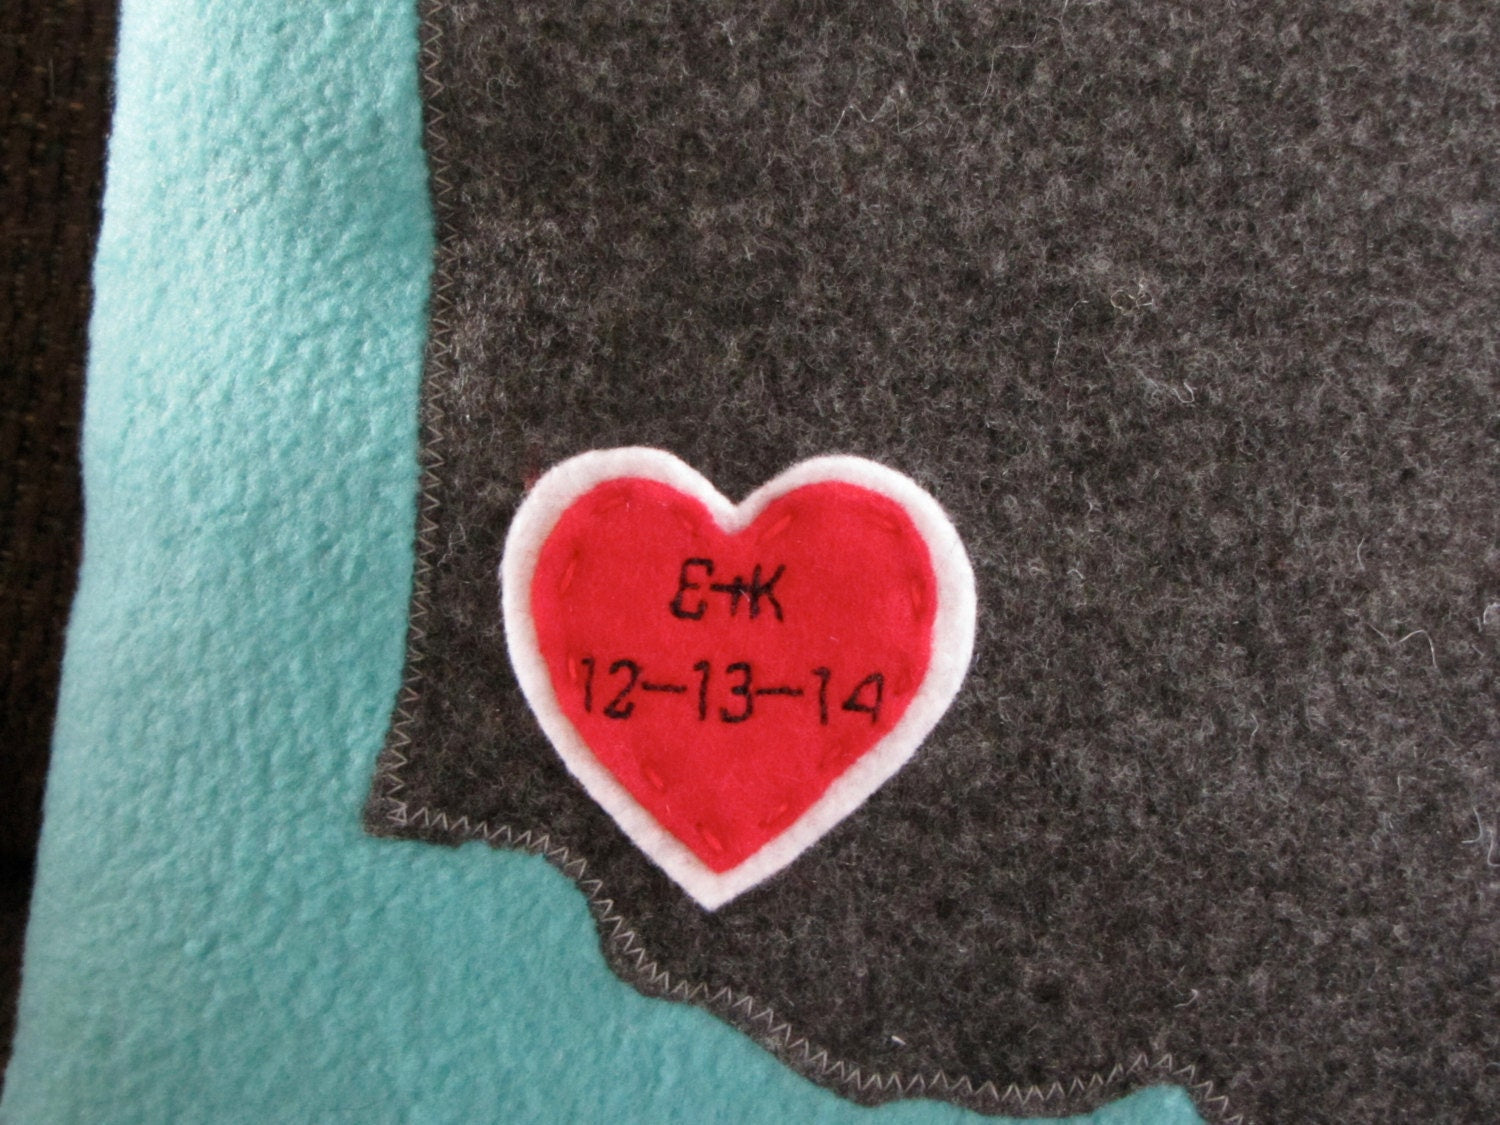 State of Kentucky Pillow with heart